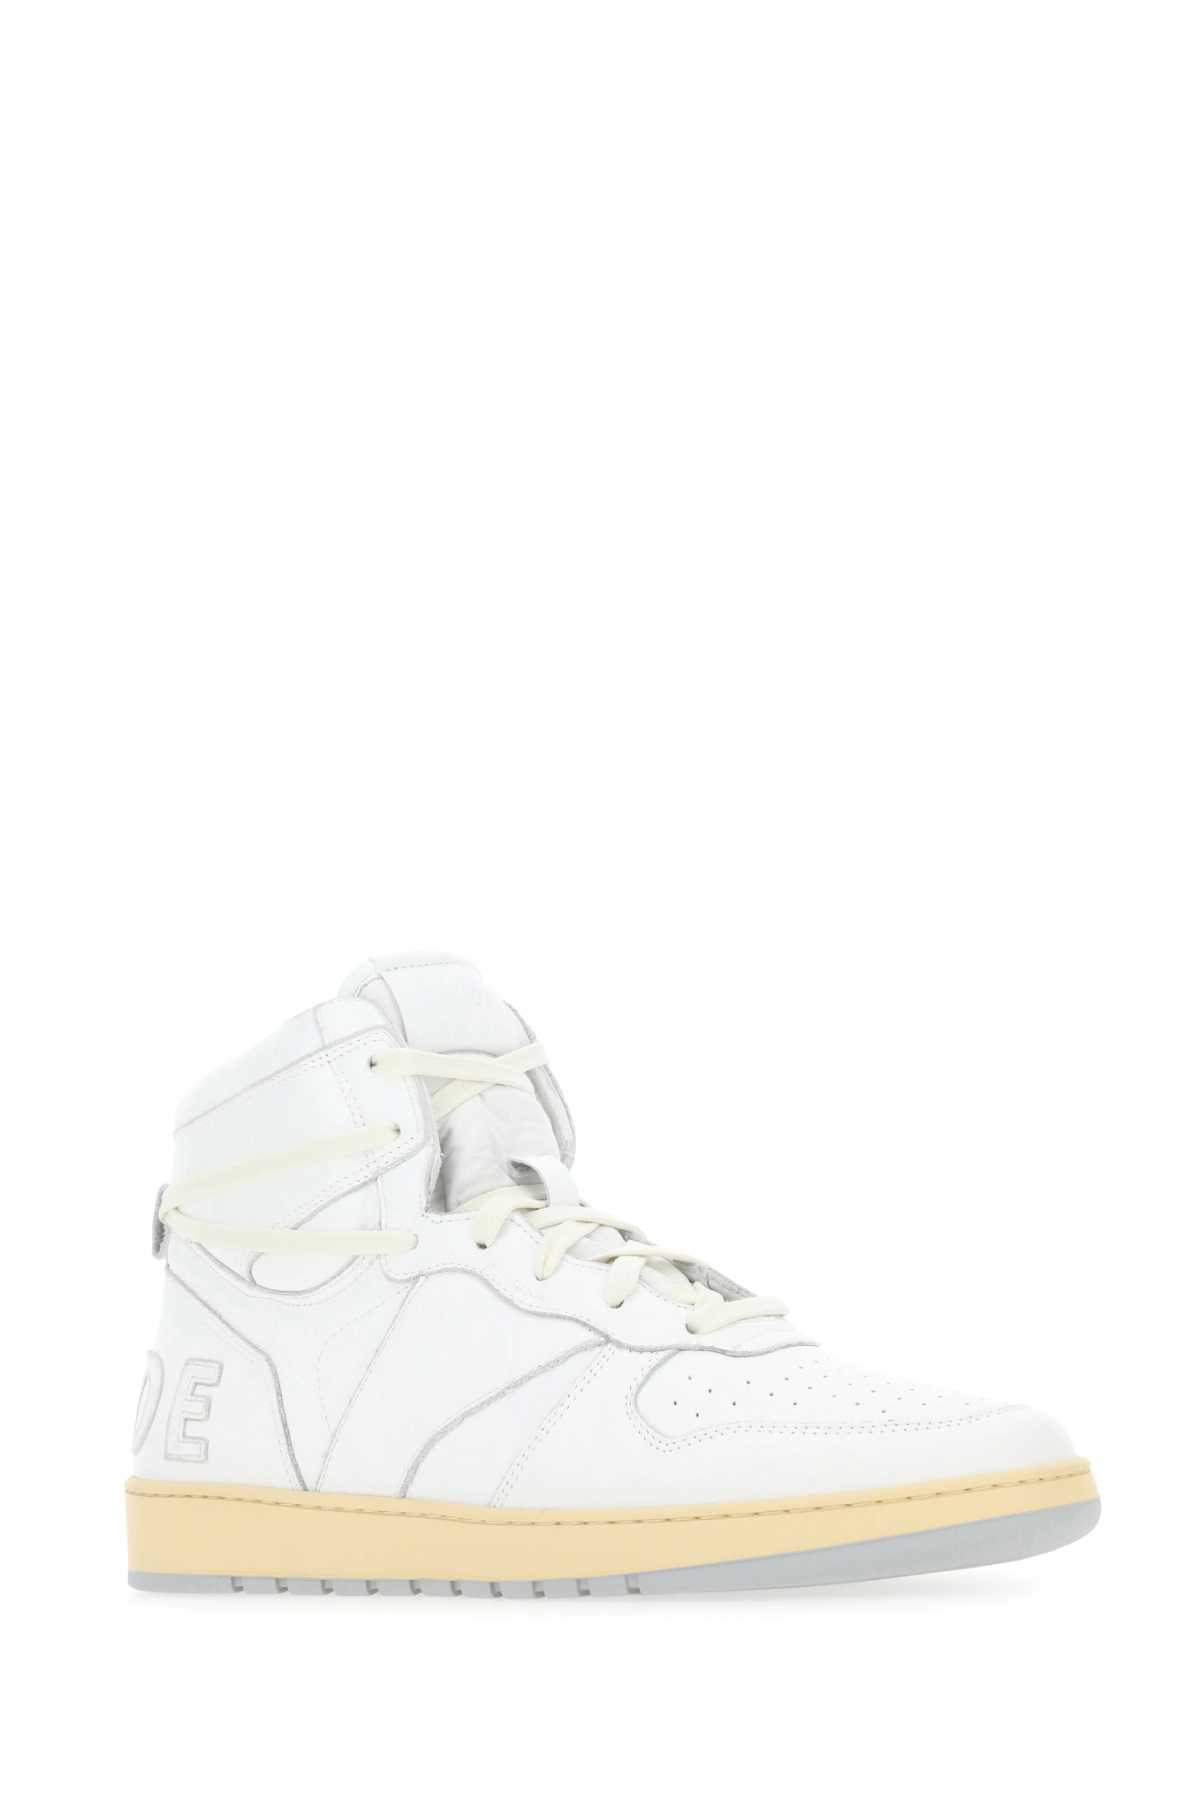 Rhude White Leather Rhecess Sneakers In 0444